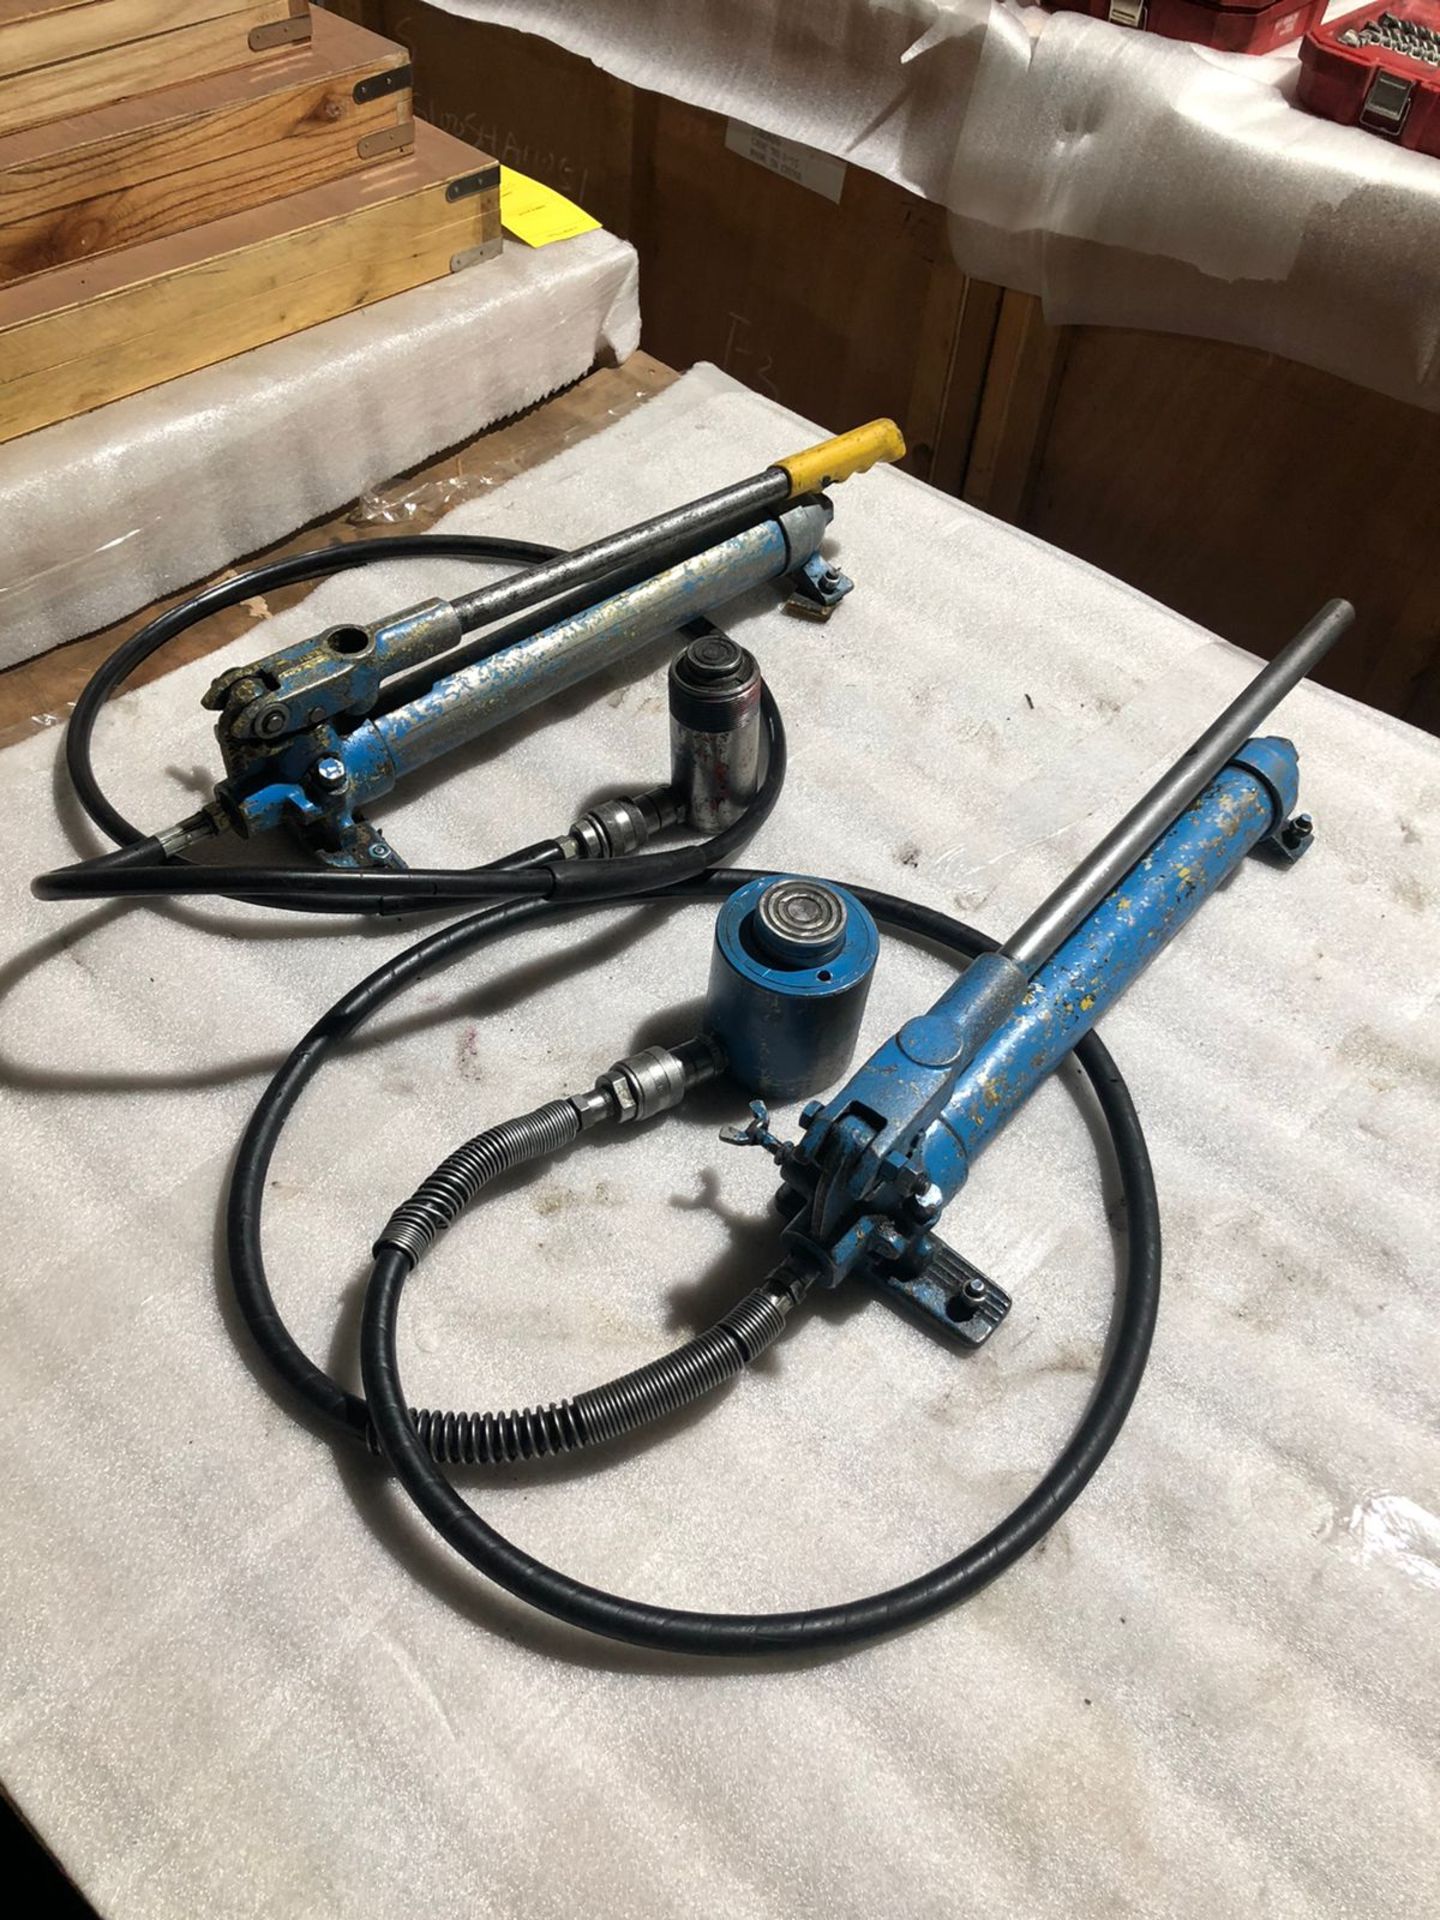 Lot of 2 (2 units) Enerpac Hand Pumps with Jacks *** FROM 5-STAR RIGGING - Image 2 of 2